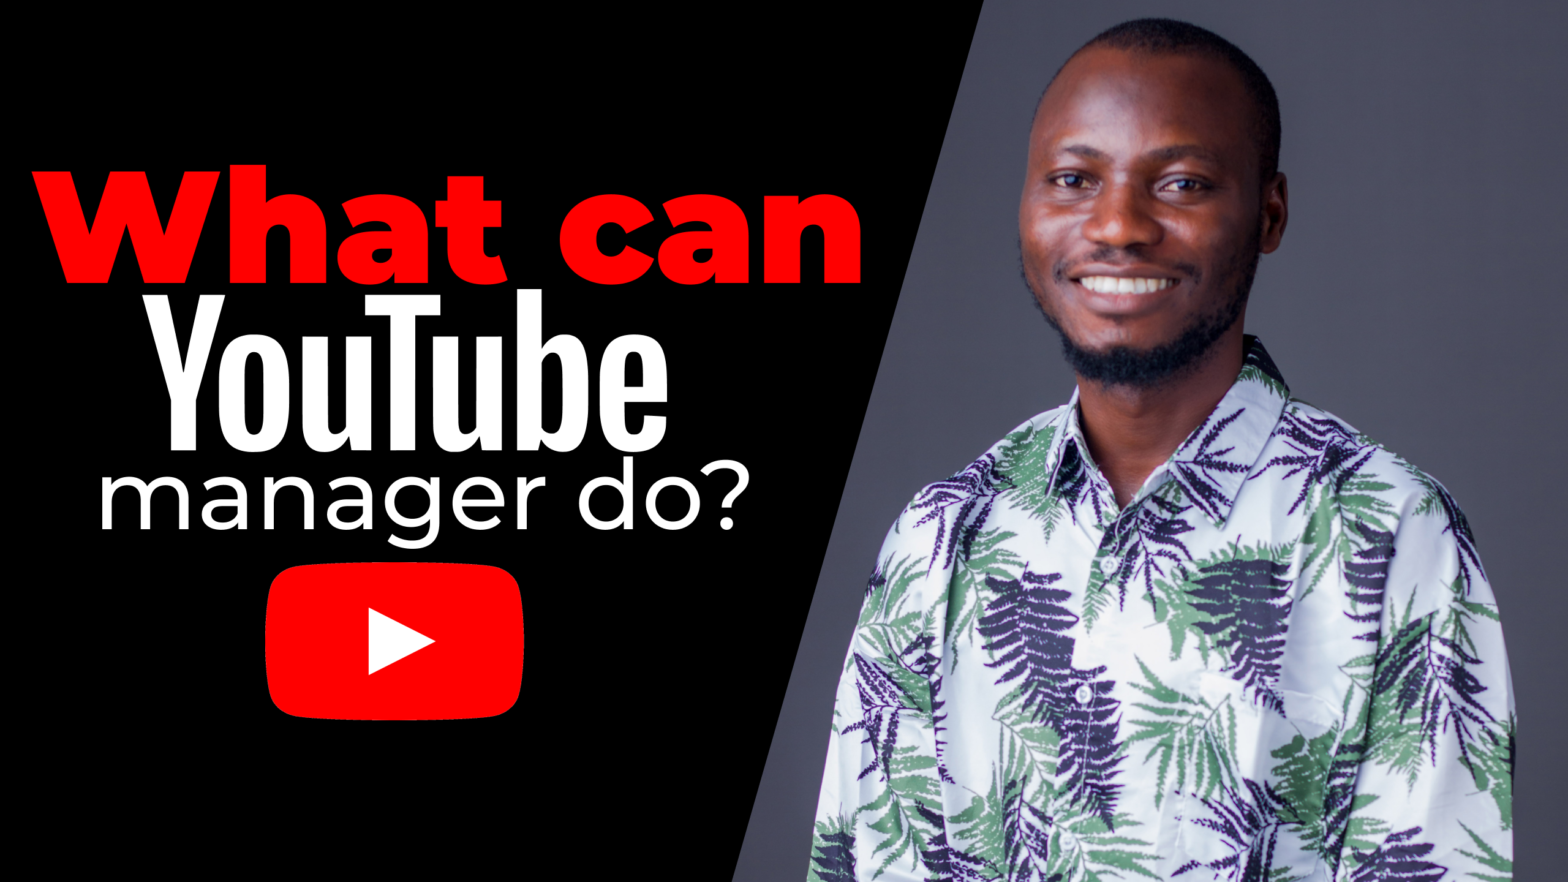 What Can YouTube Managers do?